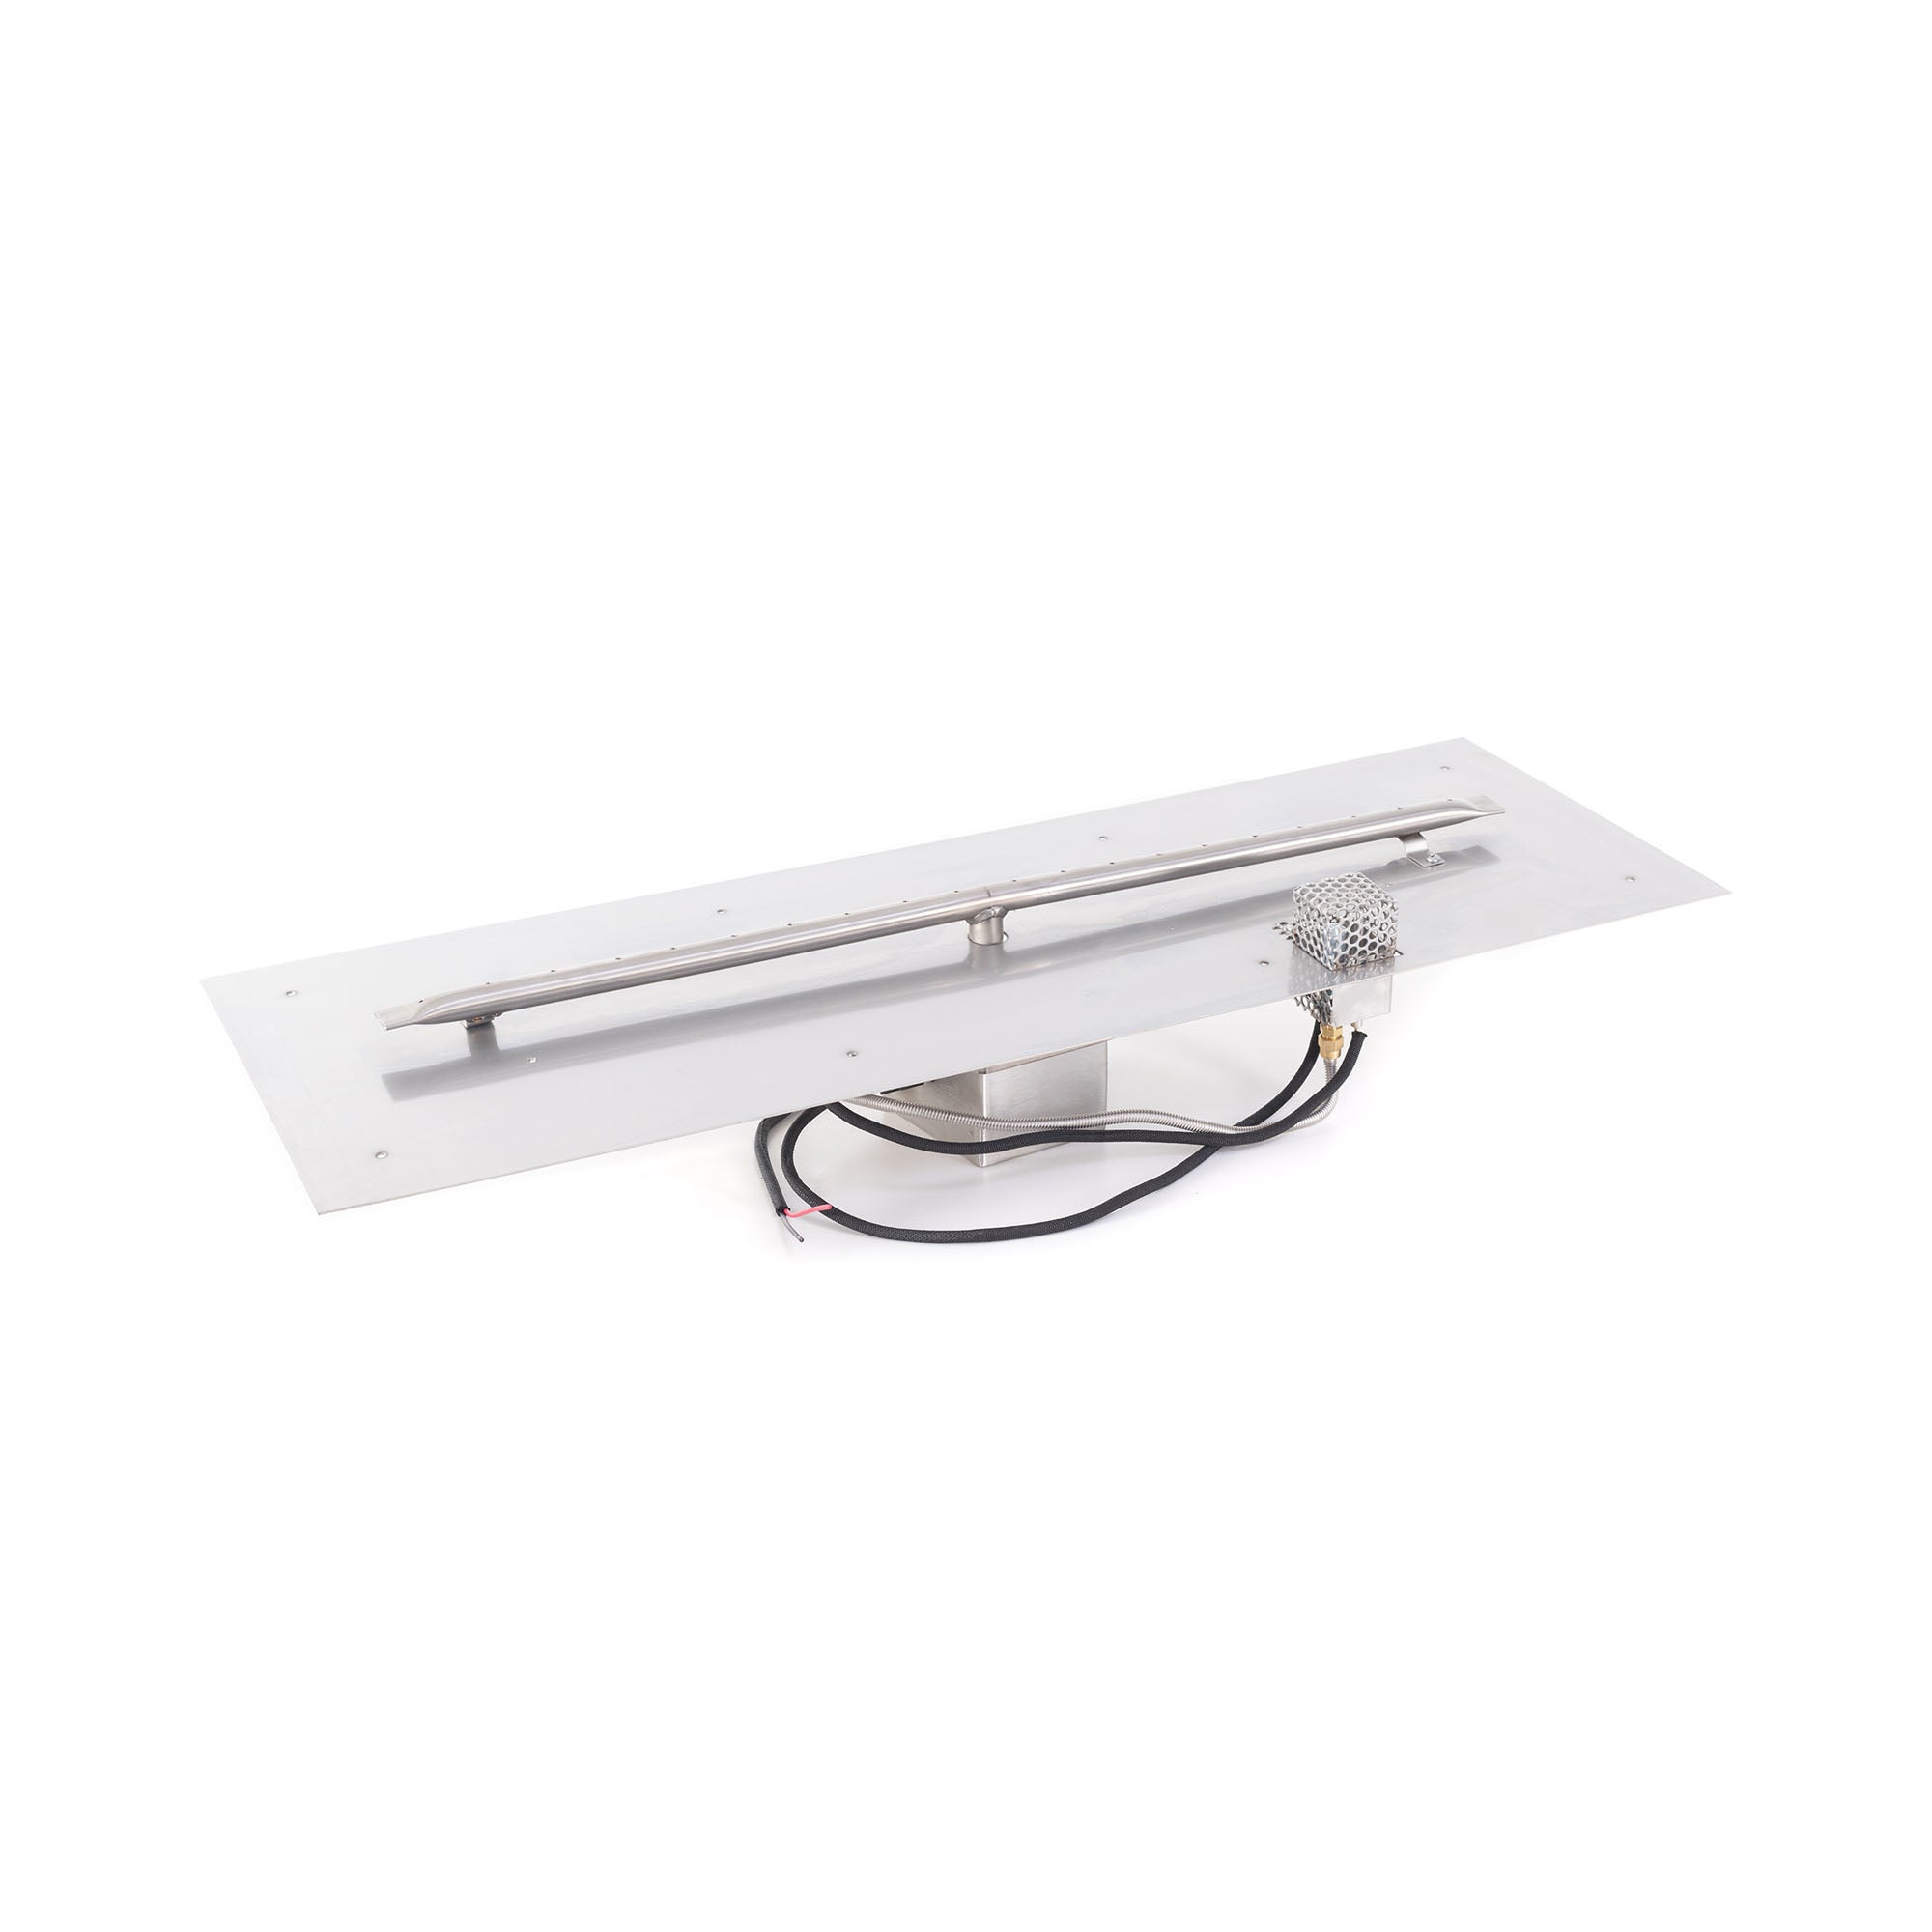 The Outdoor Plus - 72 Inch Rectangular Stainless Steel Flat Pan and 60 Inch Linear Burner - OPT-REFS872